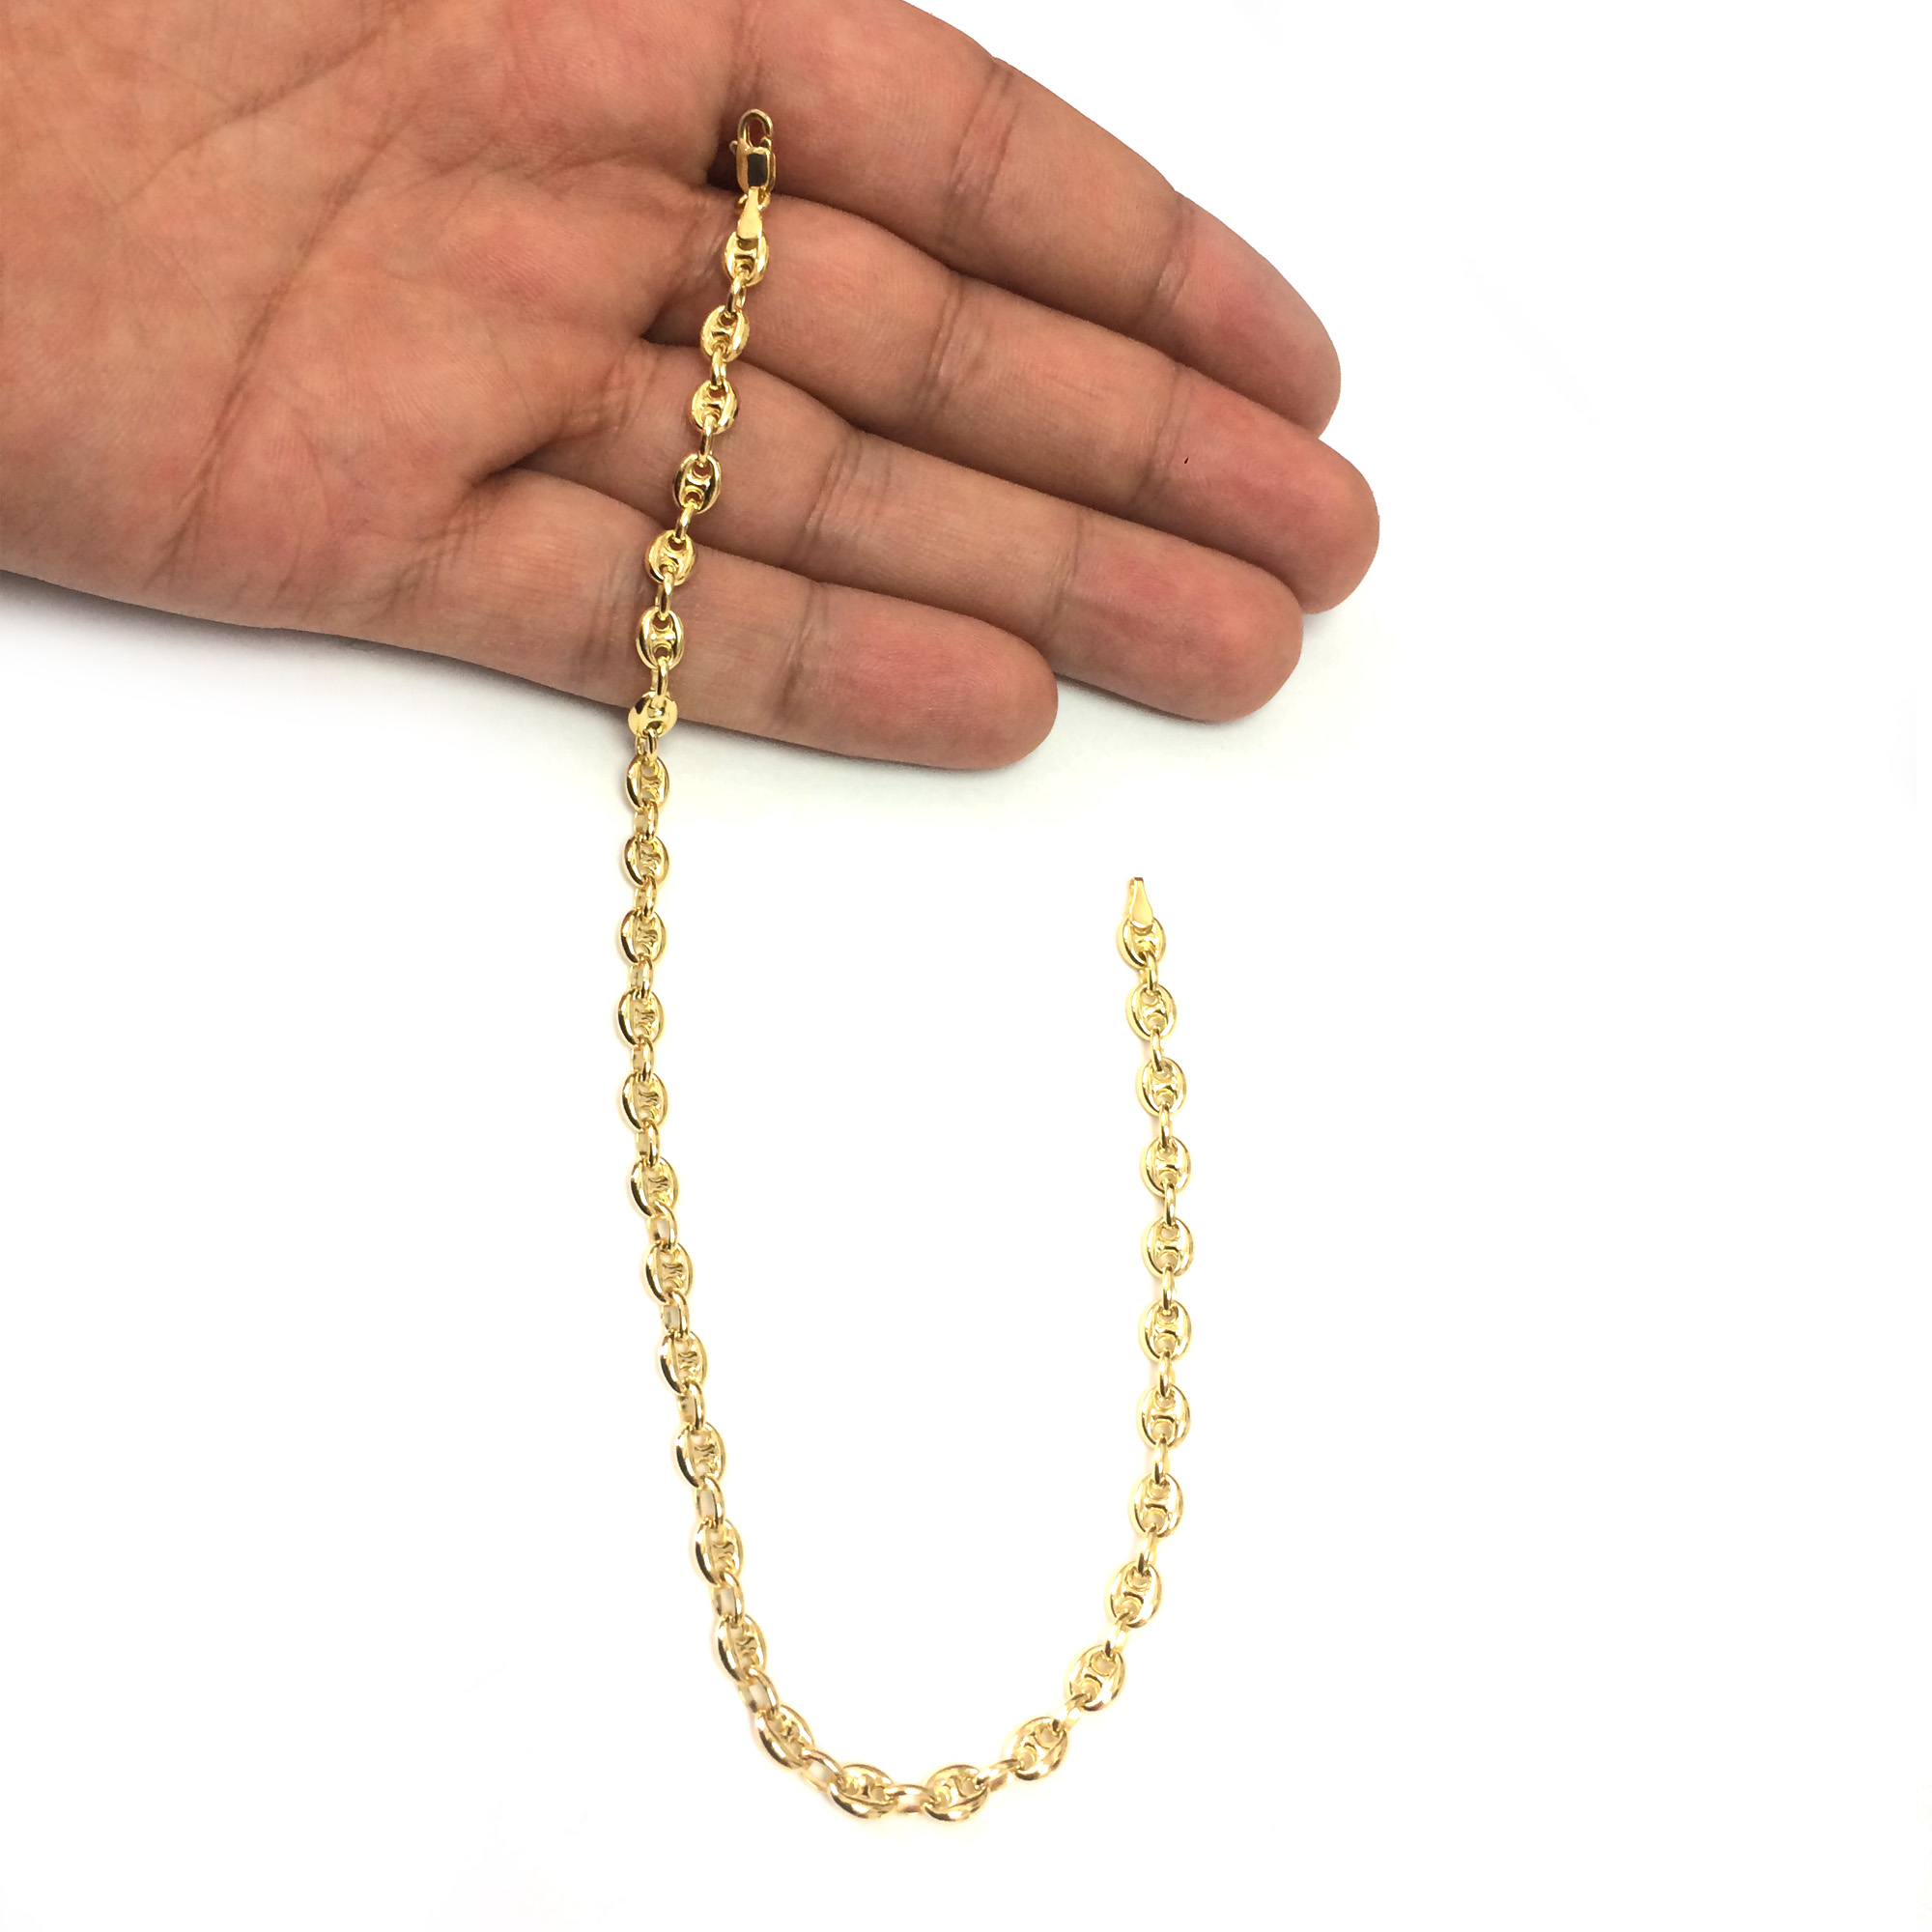 Jewelry Affairs 14K Yellow Gold Mariner Chain Anklet Bracelet, 10"